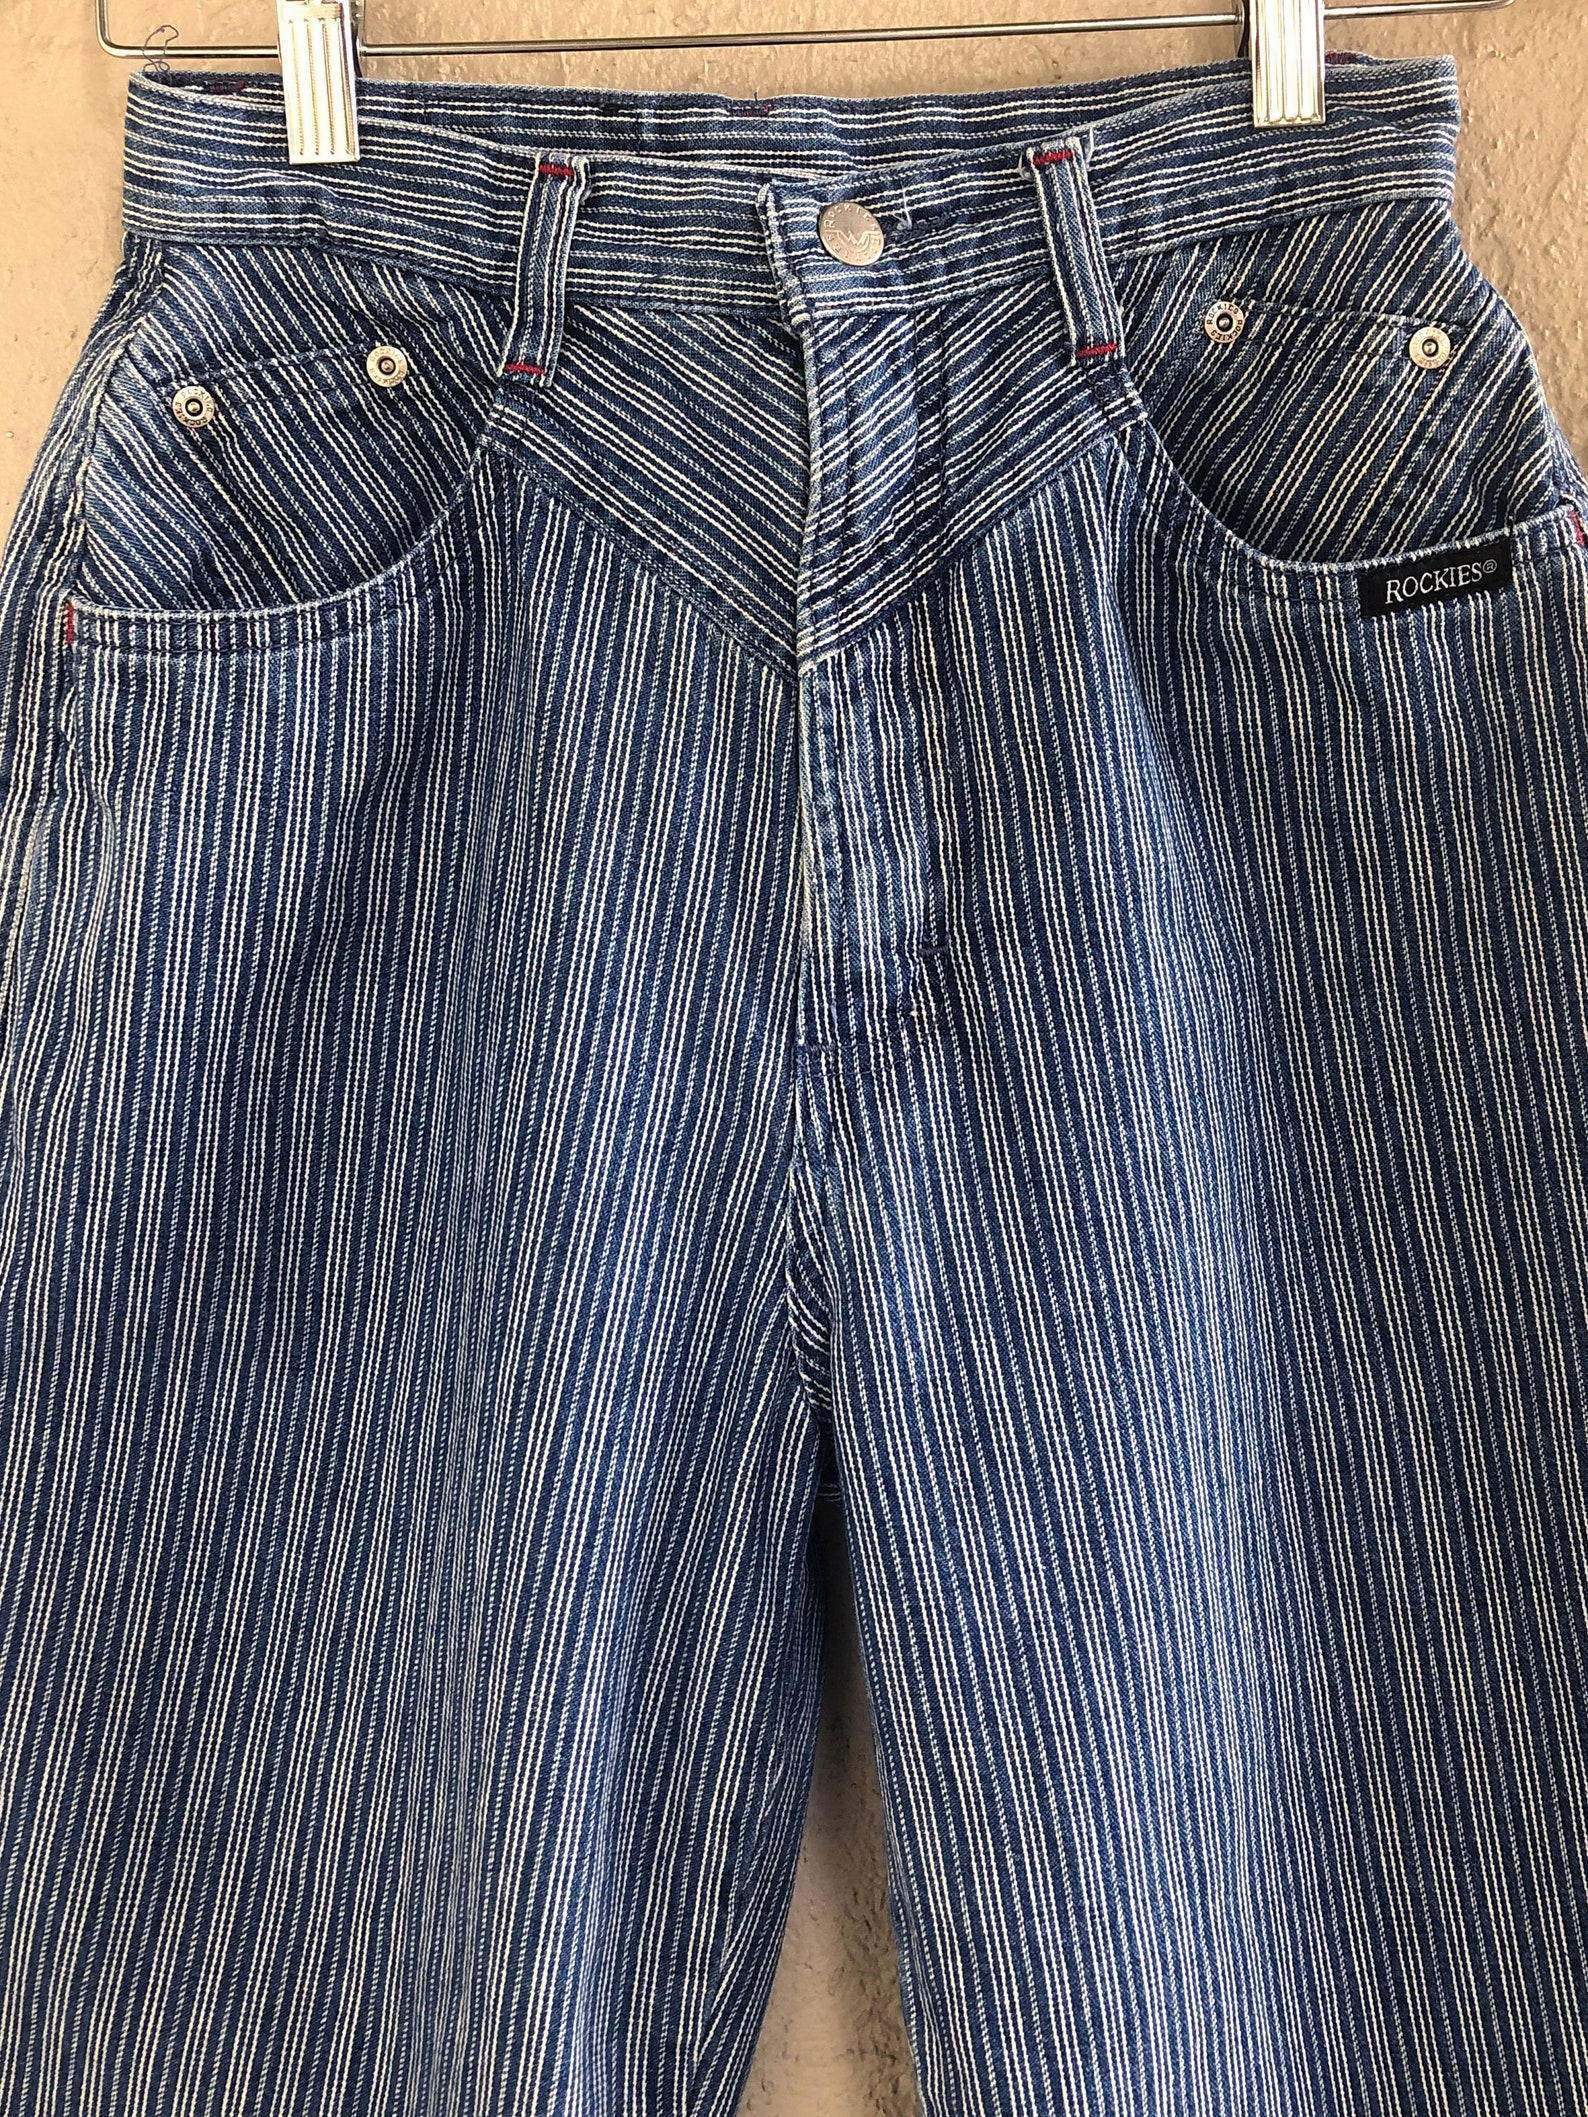 90s Rockies Pinstripe Cropped Jeans Blue and White Striped | Etsy